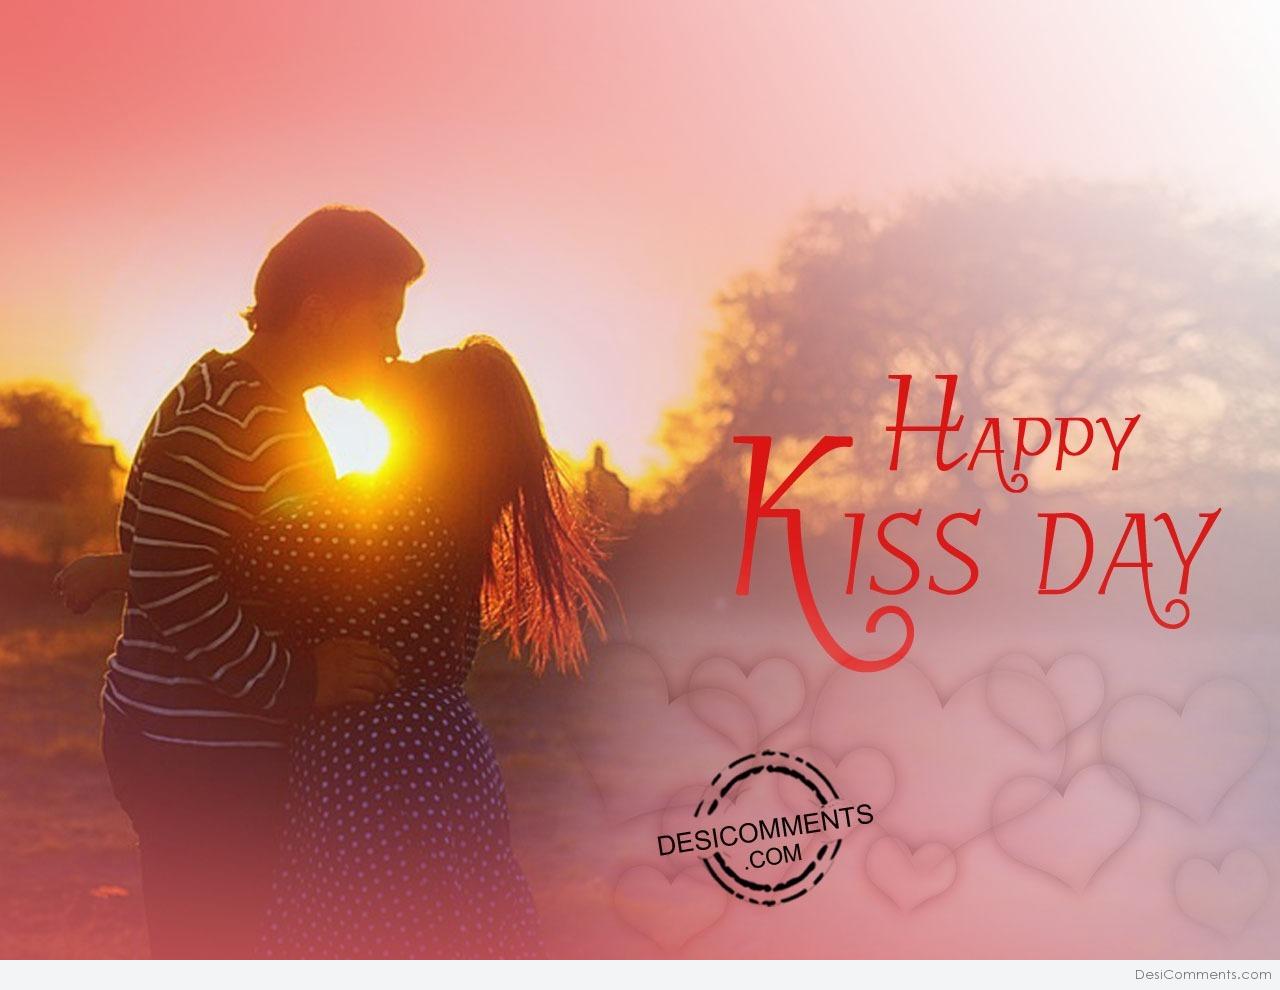 Very Happy Kiss day! - DesiComments.com